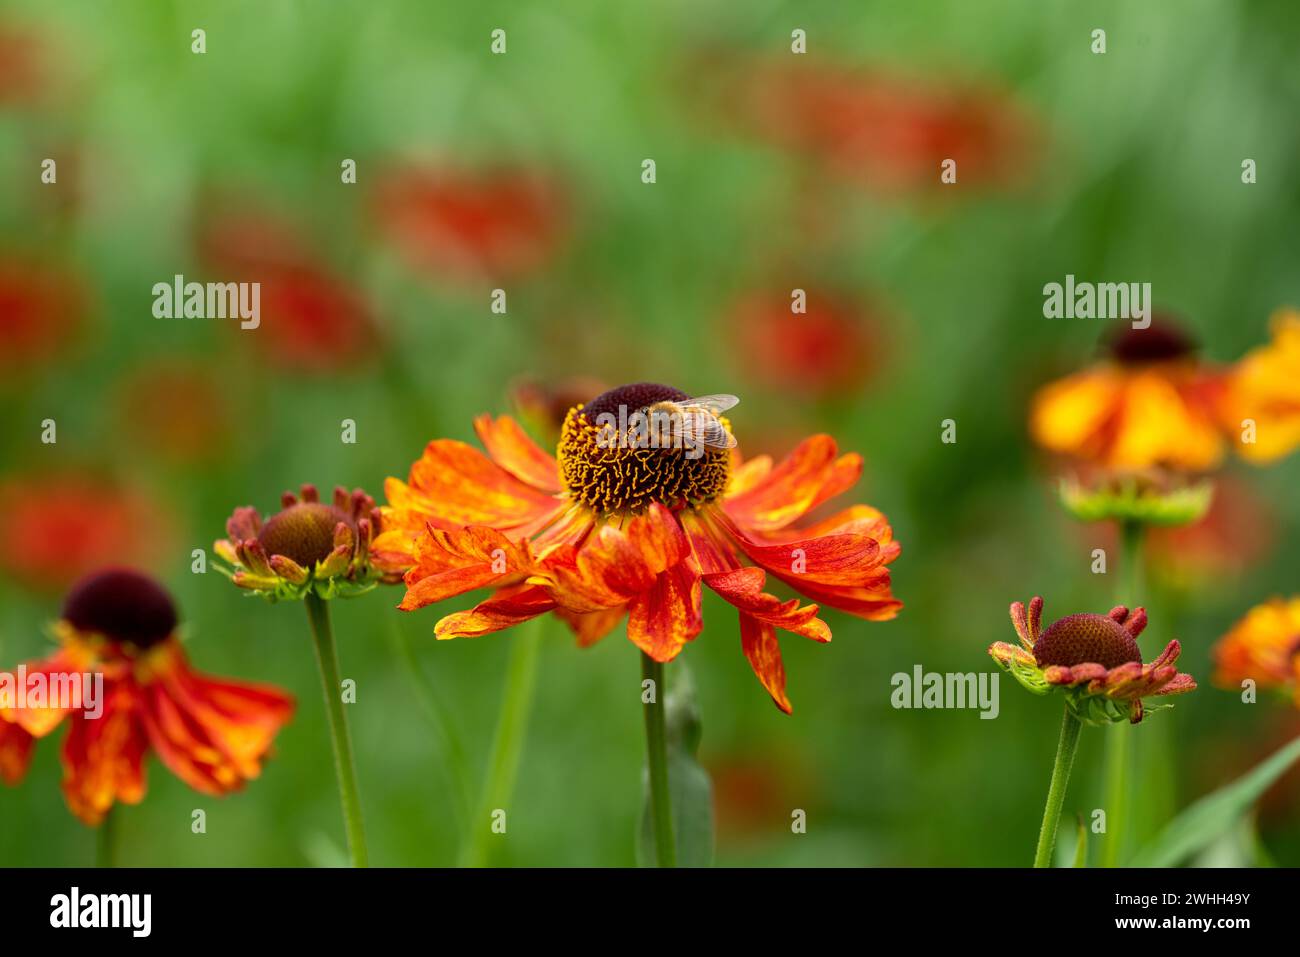 Close up of Helenium Moerheim flowers with a Honey bee with a defocused background Stock Photo